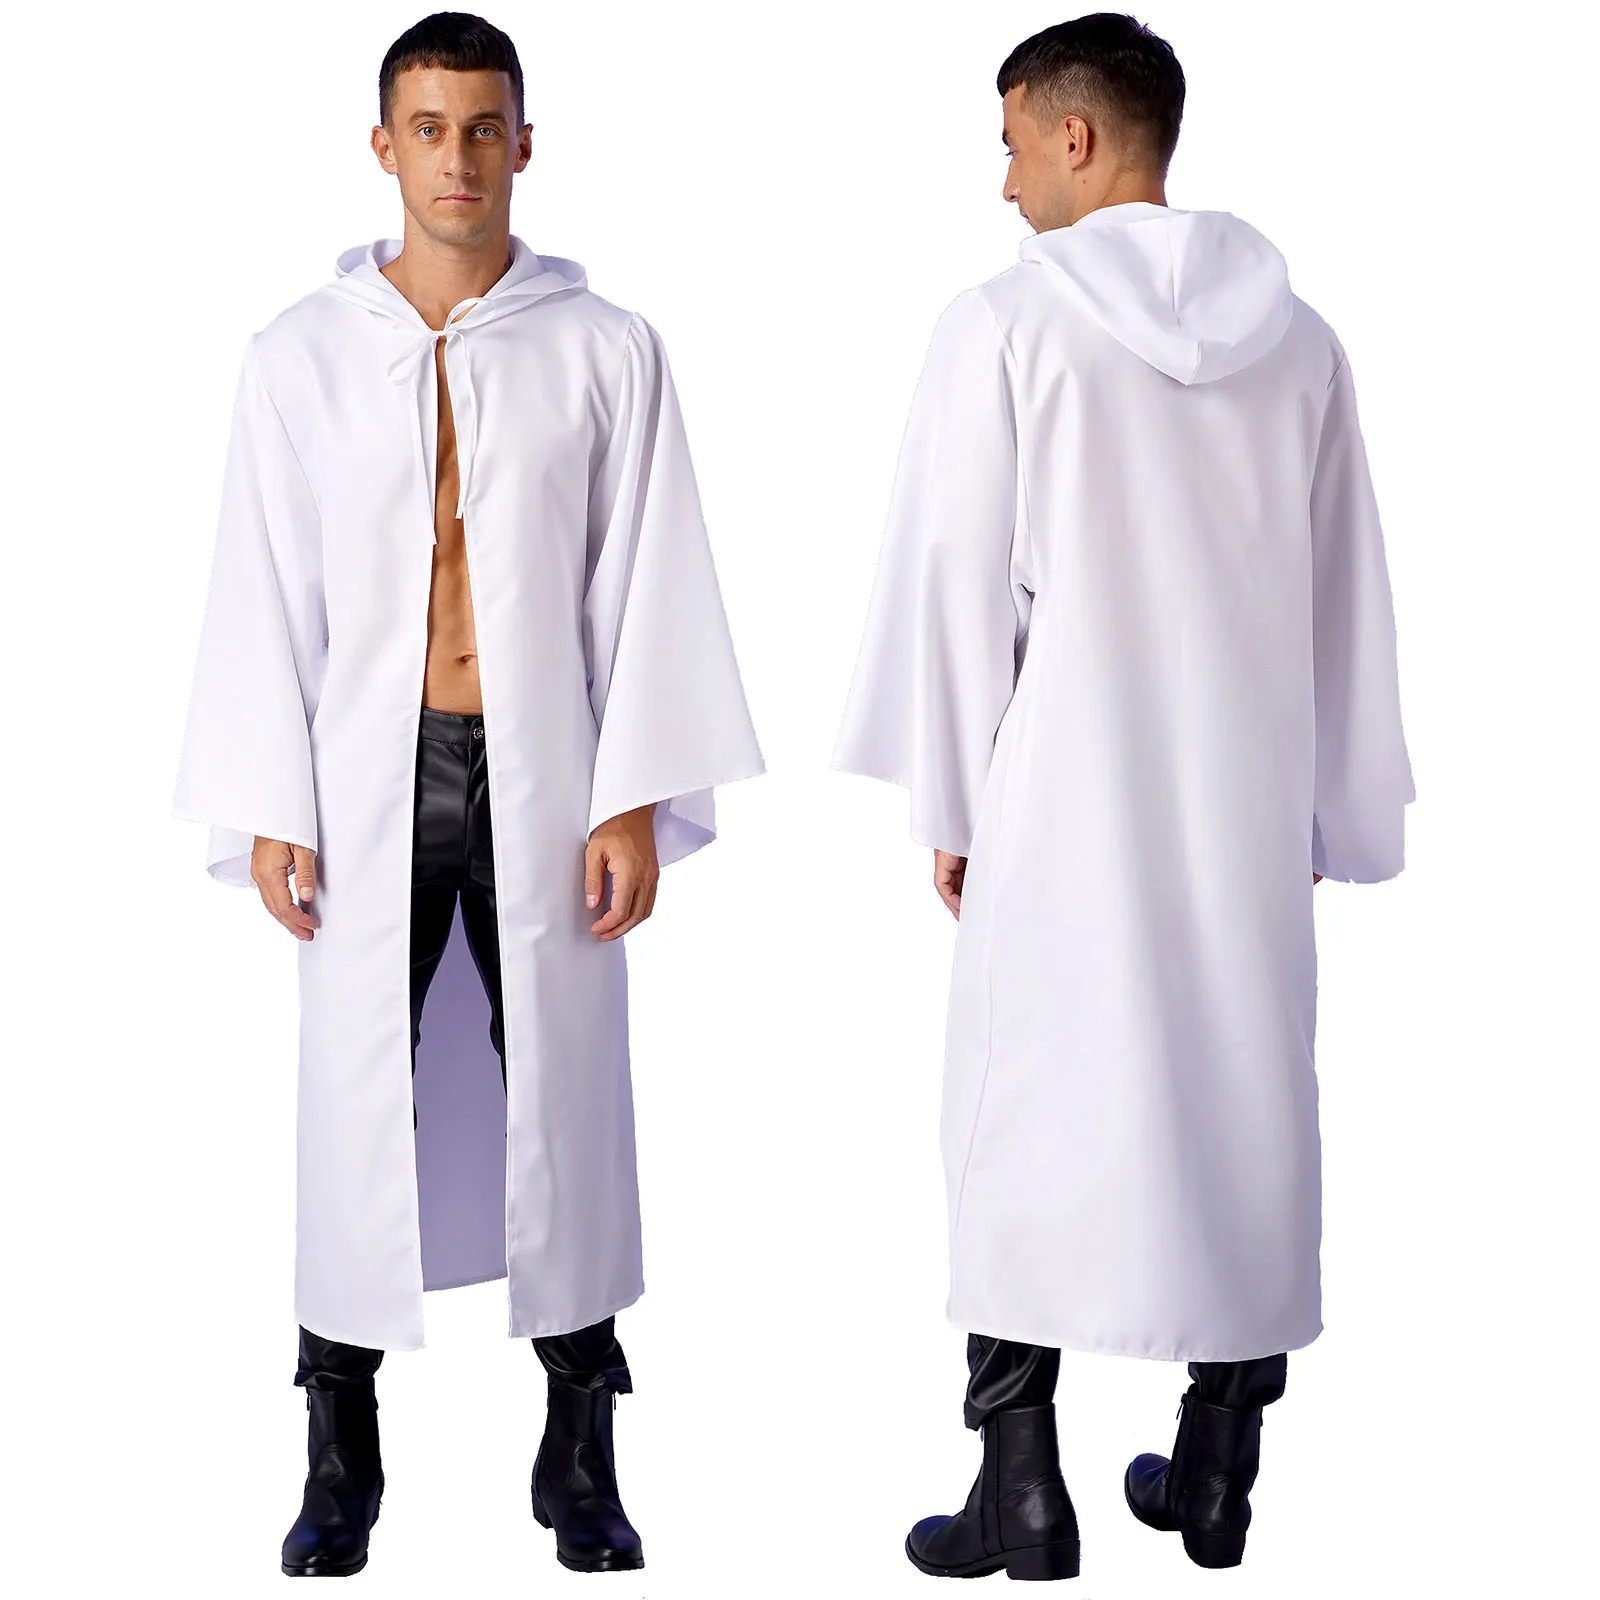 

Mens The Star Wars Warrior Cosplay Costume Halloween Theme Party Christmas Role Play Clothes Tunic Tie Hooded Robe Cloak Cape